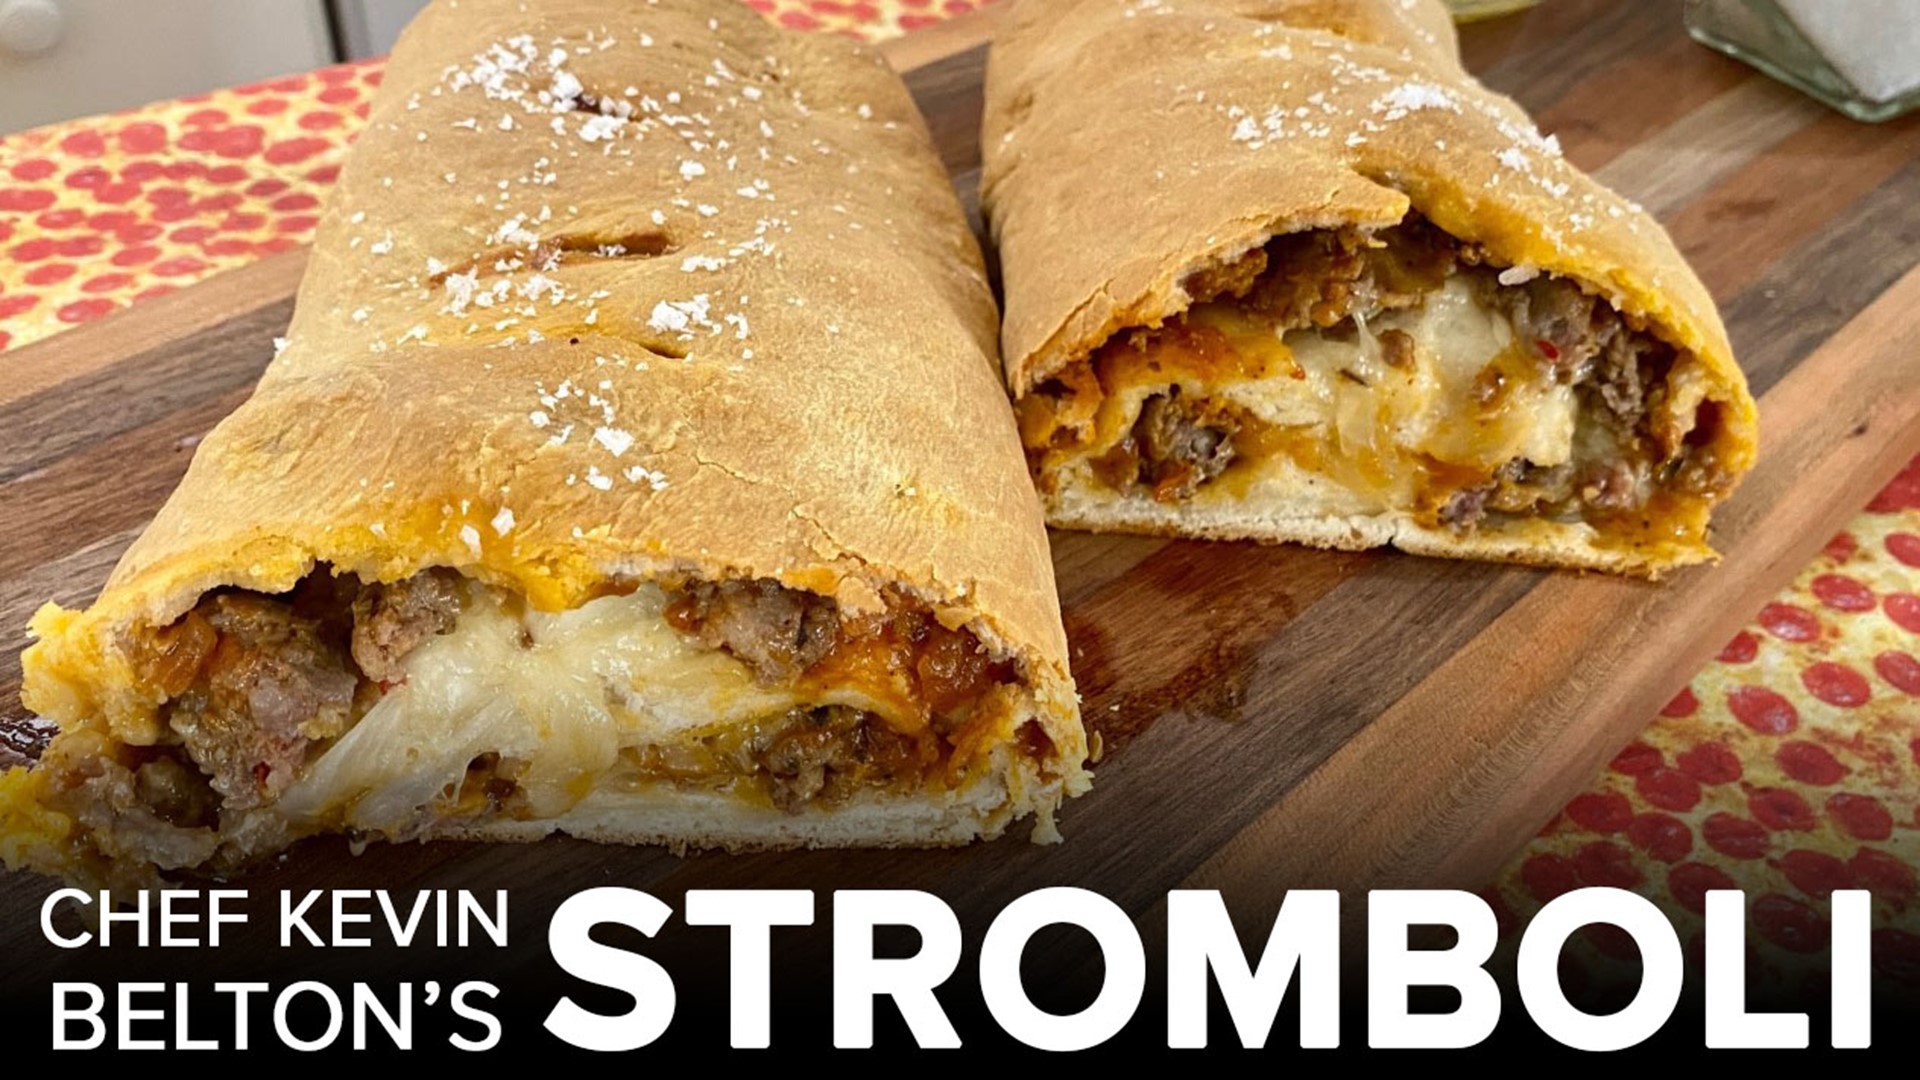 Today, we're going to make our own pizza dough and then put a little twist on it by folding it into a Stromboli.